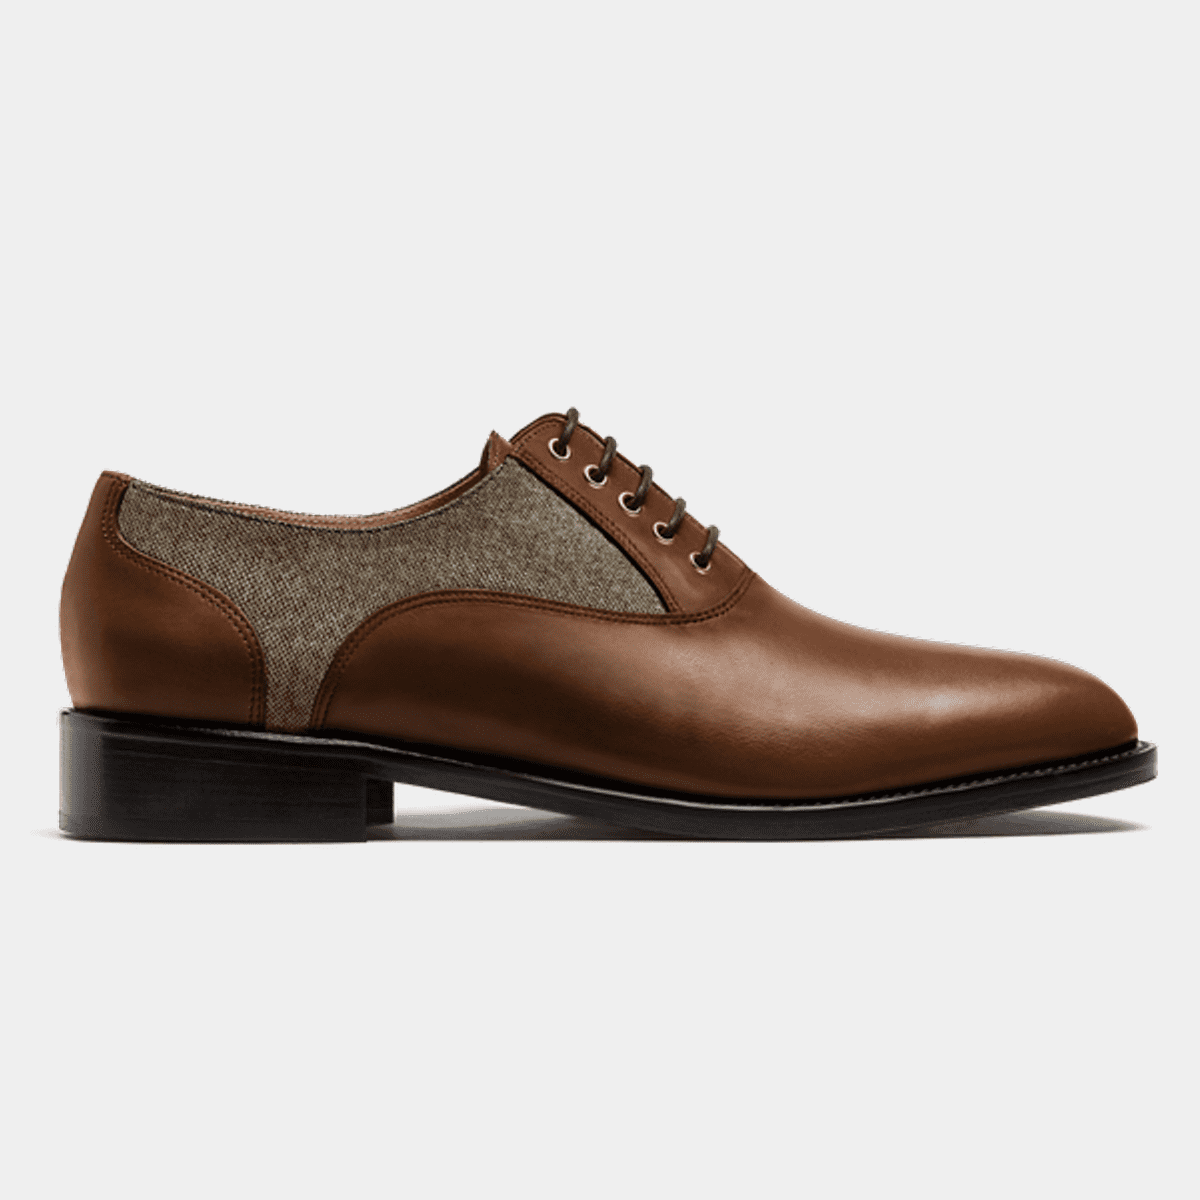 Oxford shoes - brown leather & tweed